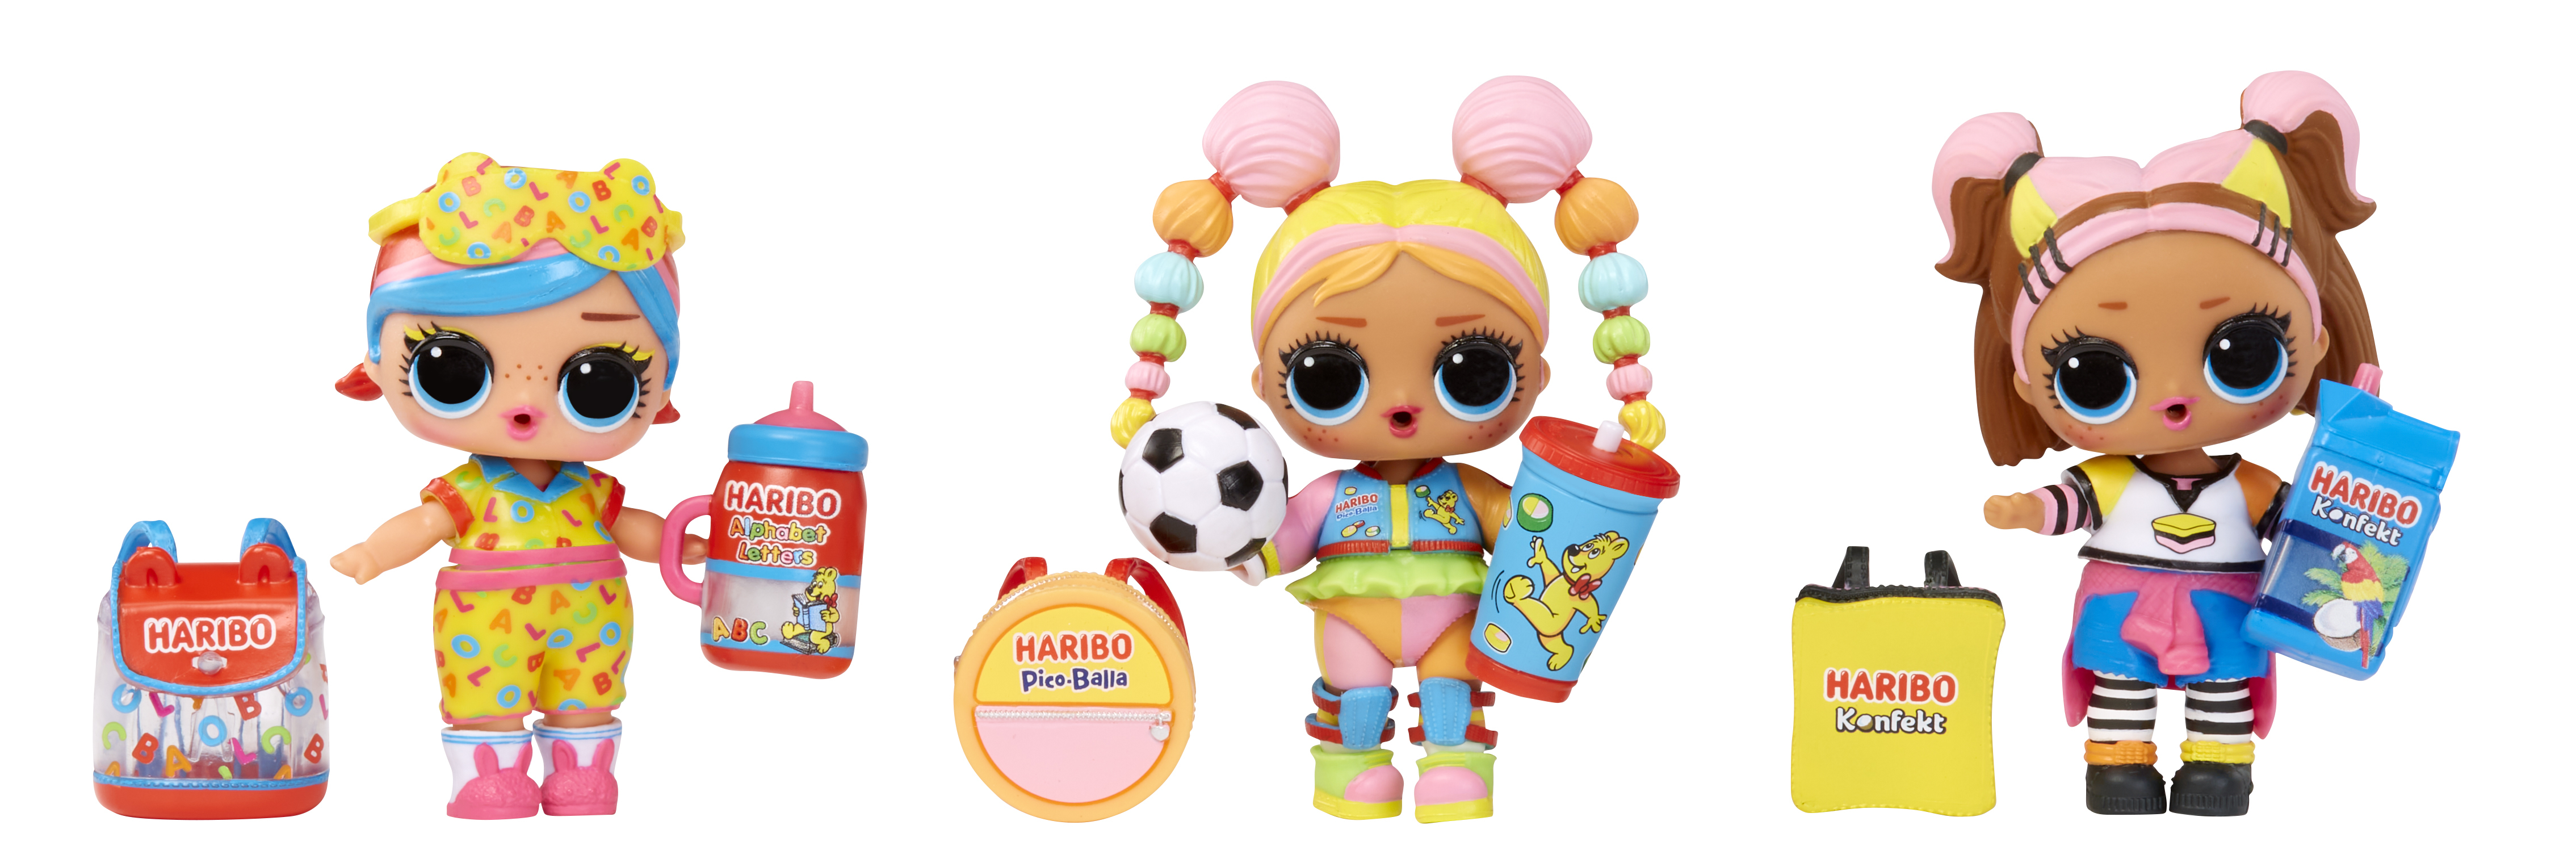 LOL Surprise Doll Haribo Mini Sweets BERRY BEAUTY Brand New Same Day Post